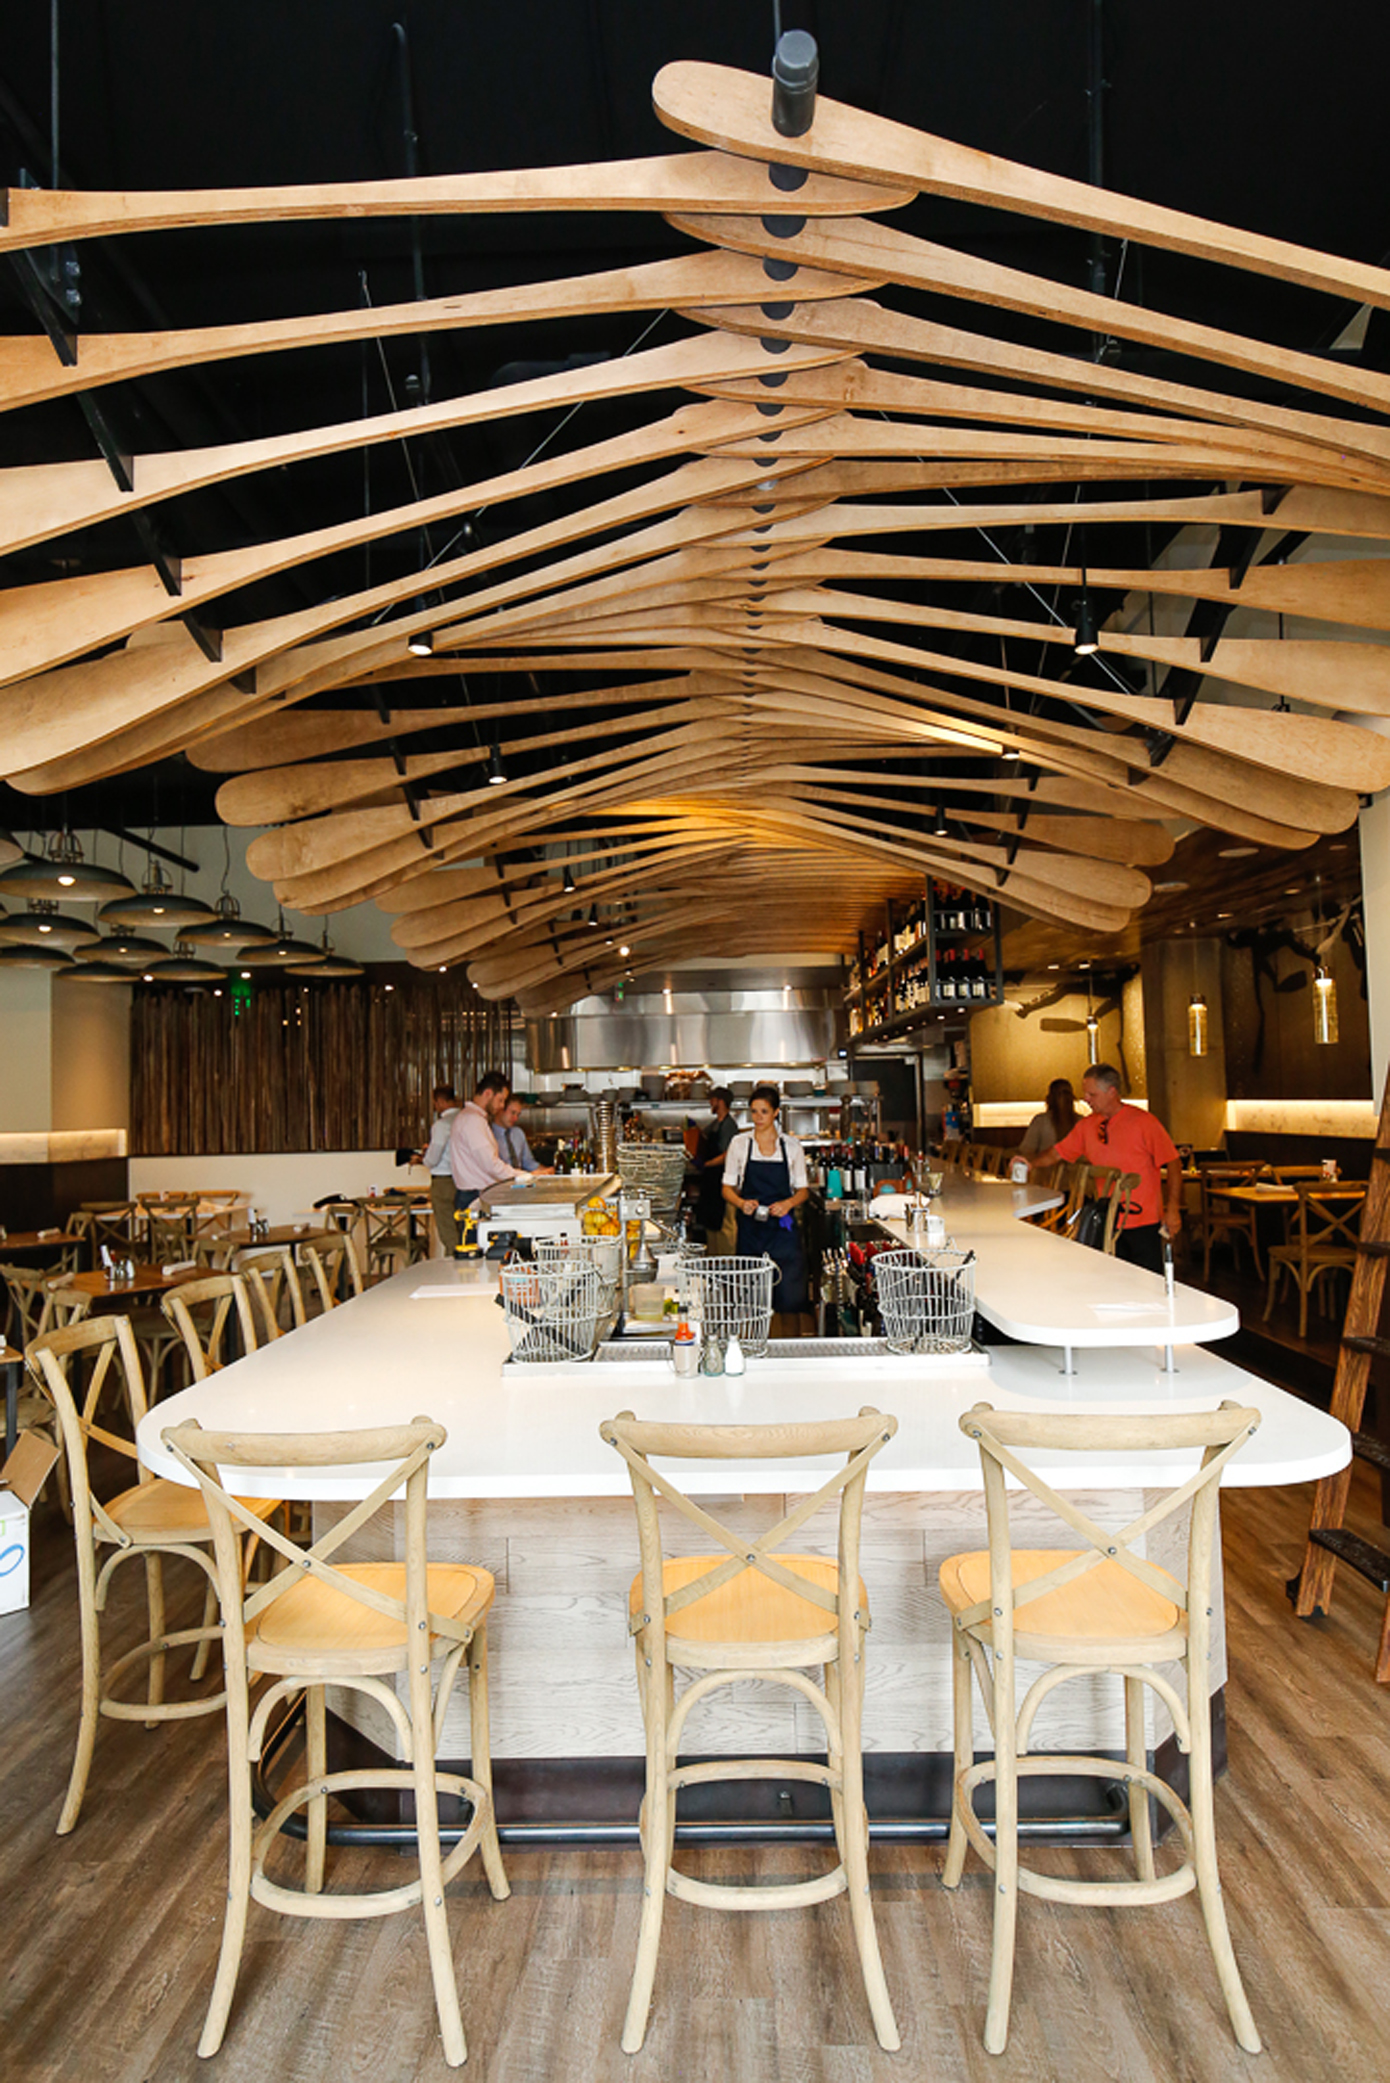 Honored as an “inspiring restaurant interior” by Food52, the Arch11 design of Blue Island Oyster Bar also was named a top 5 “stone-cold stunner” design by EaterDenver (photo courtesy of Arch11).